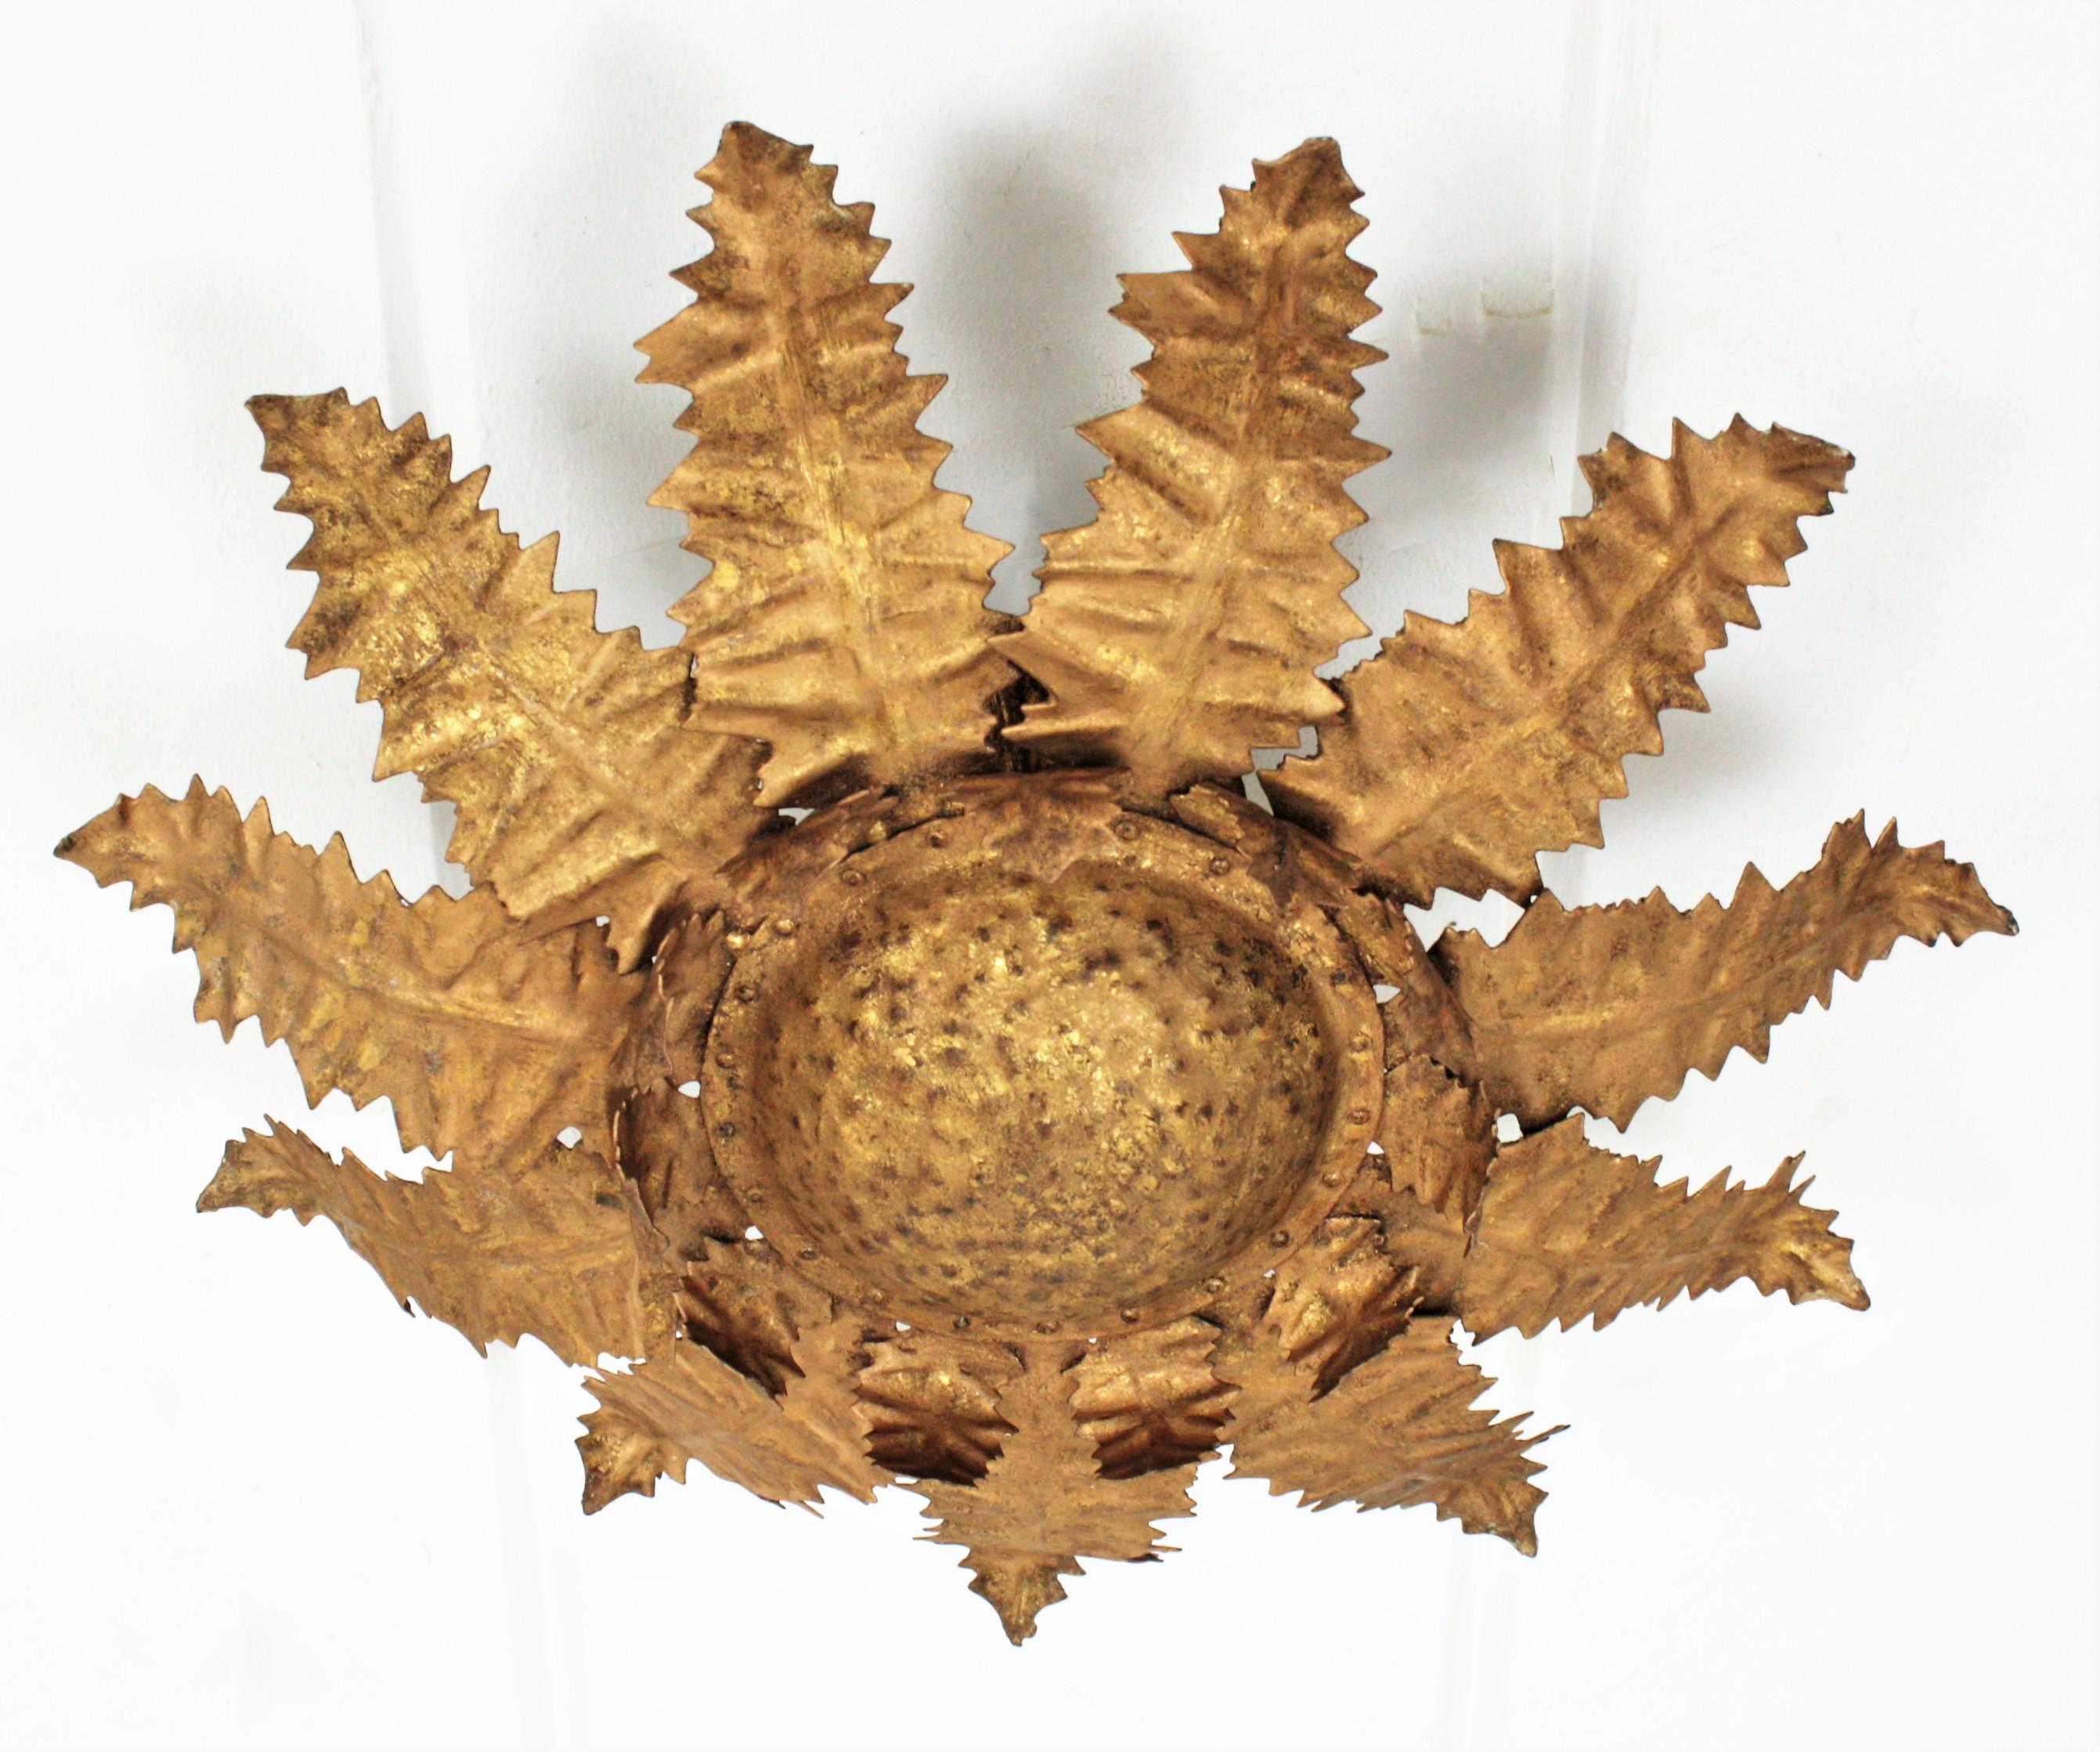 Terrific handcrafted gold gilt wrought iron sunburst leafed flush mount ceiling light. France, 1950s.
This ceiling light fixure has a foliate sunburst or flower burst design with a richly hammered work thorough. 
It shows an exquisite